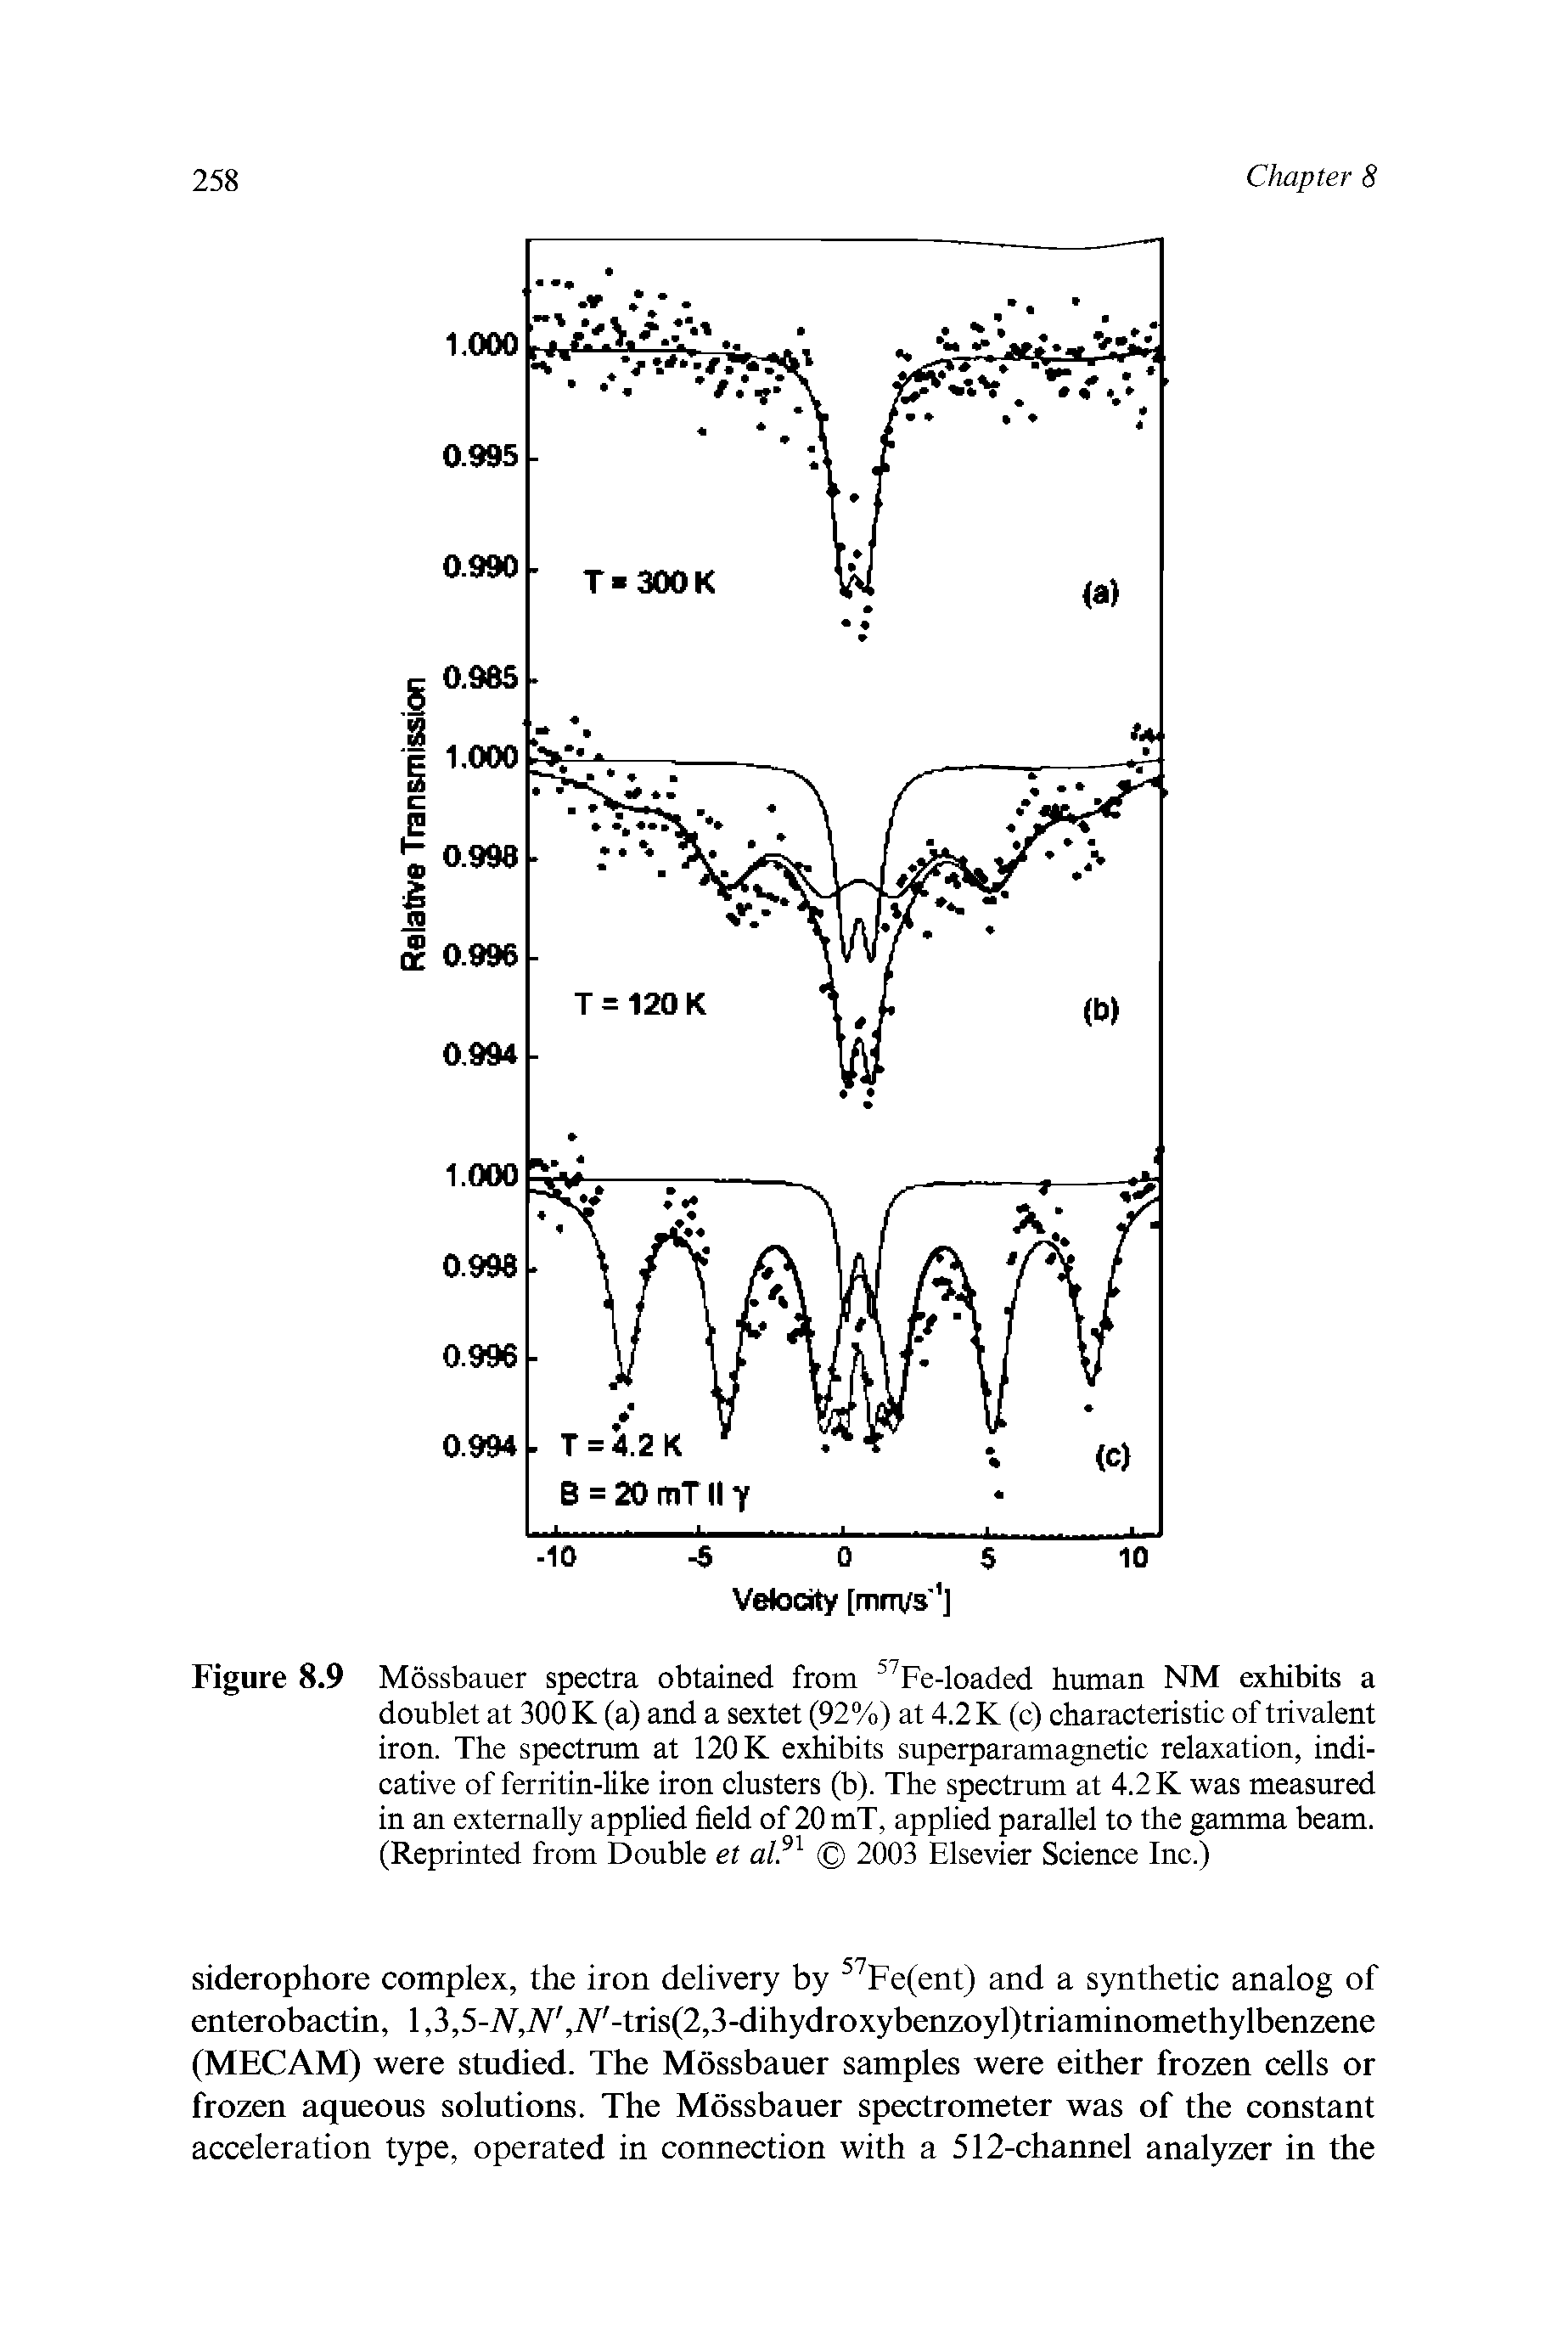 Figure 8.9 Mossbauer spectra obtained from Fe-loaded human NM exhibits a doublet at 300 K (a) and a sextet (92%) at 4.2 K (c) characteristic of trivalent iron. The spectrum at 120 K exhibits superparamagnetic relaxation, indicative of ferritin-like iron clusters (b). The spectrum at 4.2 K was measured in an externally applied field of 20 mT, applied parallel to the gamma beam. (Reprinted from Double et 2003 Elsevier Science Inc.)...